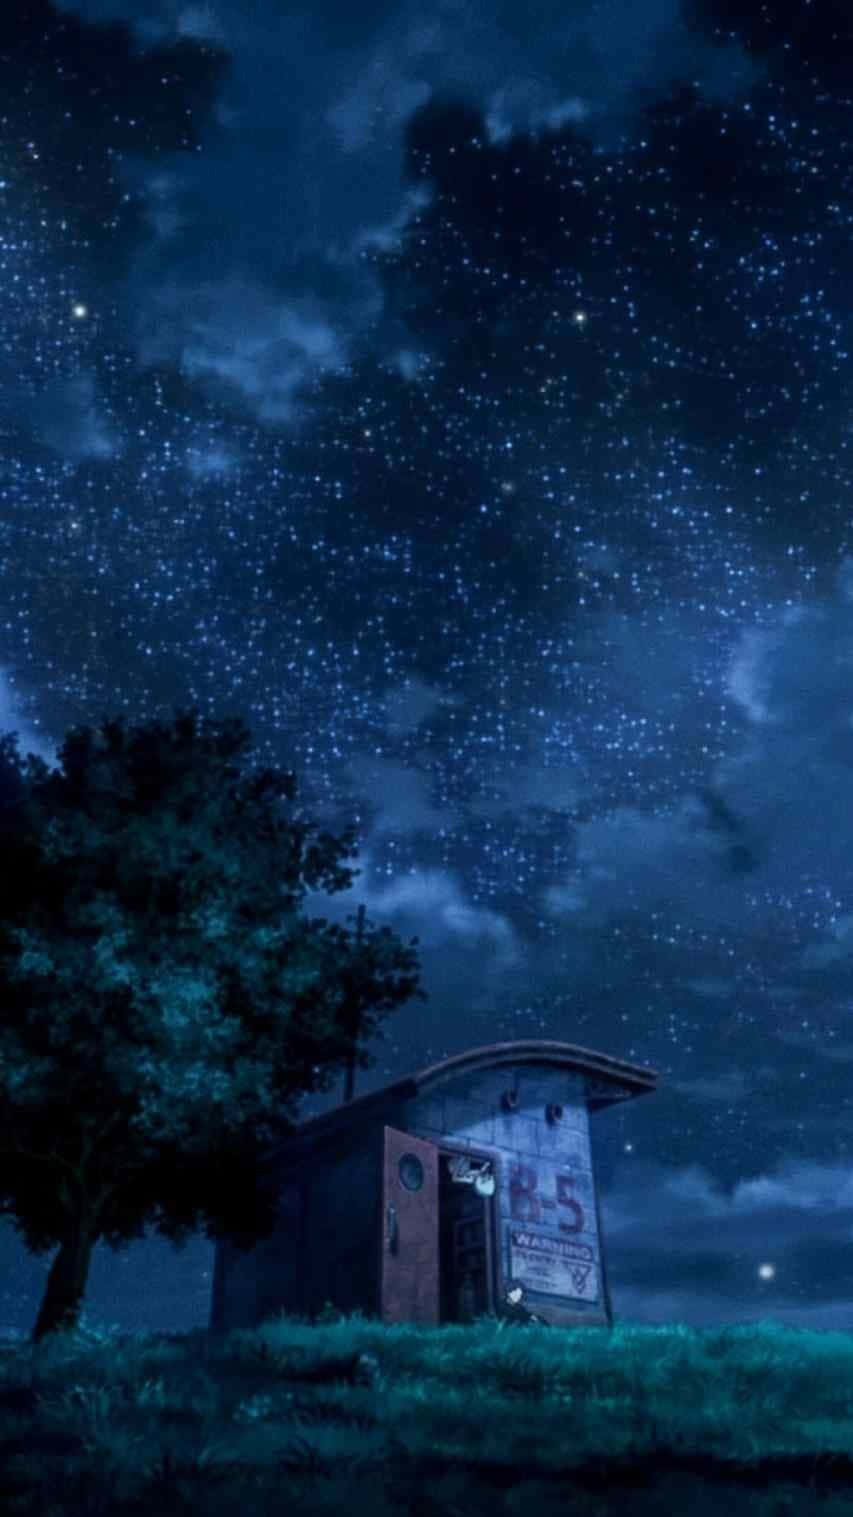 A Dark and Mysterious Anime Scenery Wallpaper